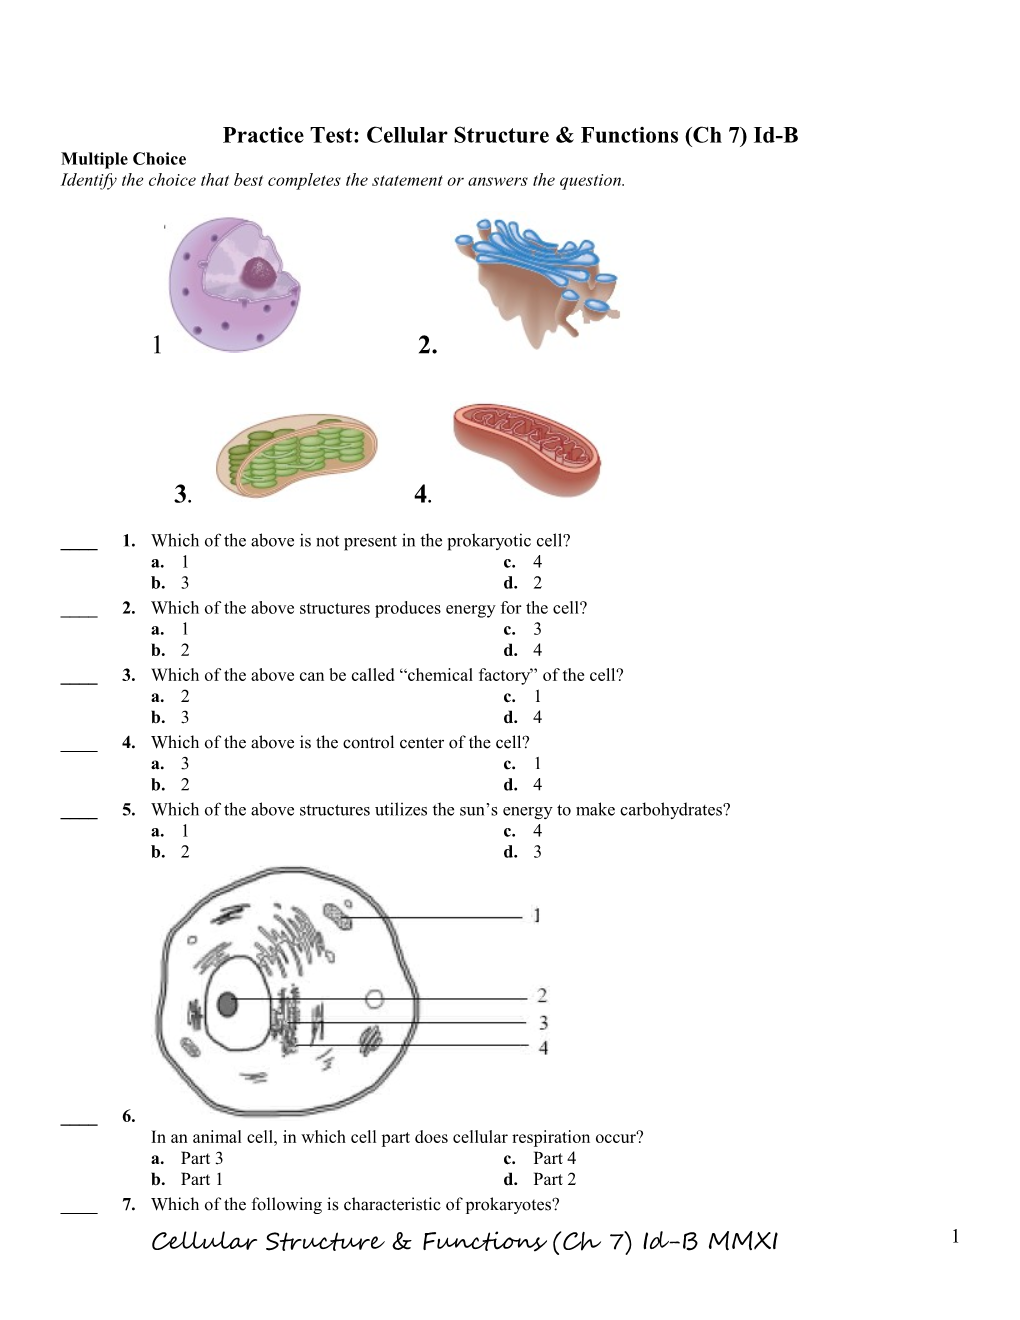 Test: Cellular Structure & Functions (Ch 7) Id-B